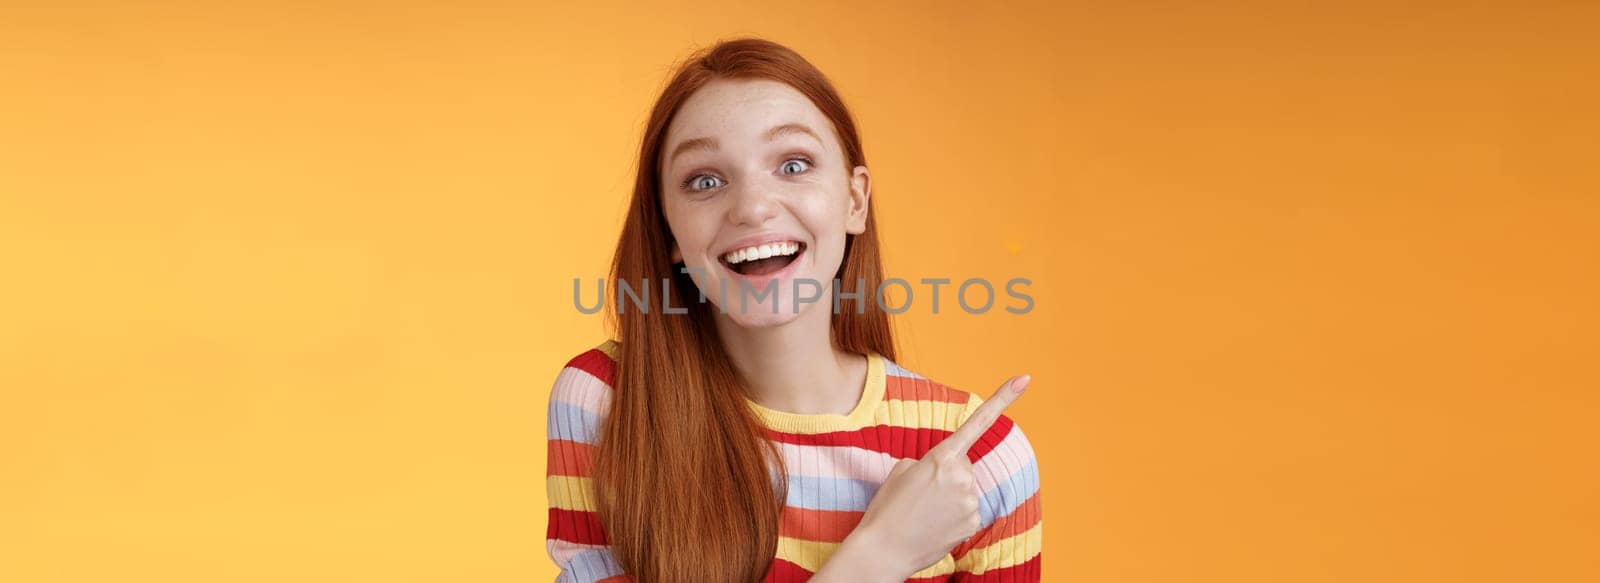 Amused carefree thrilled emotional redhead female fan adore talking favorite movie pointing upper left corner fascinated smiling broadly happy delighted attend incredible party, orange background. Lifestyle.